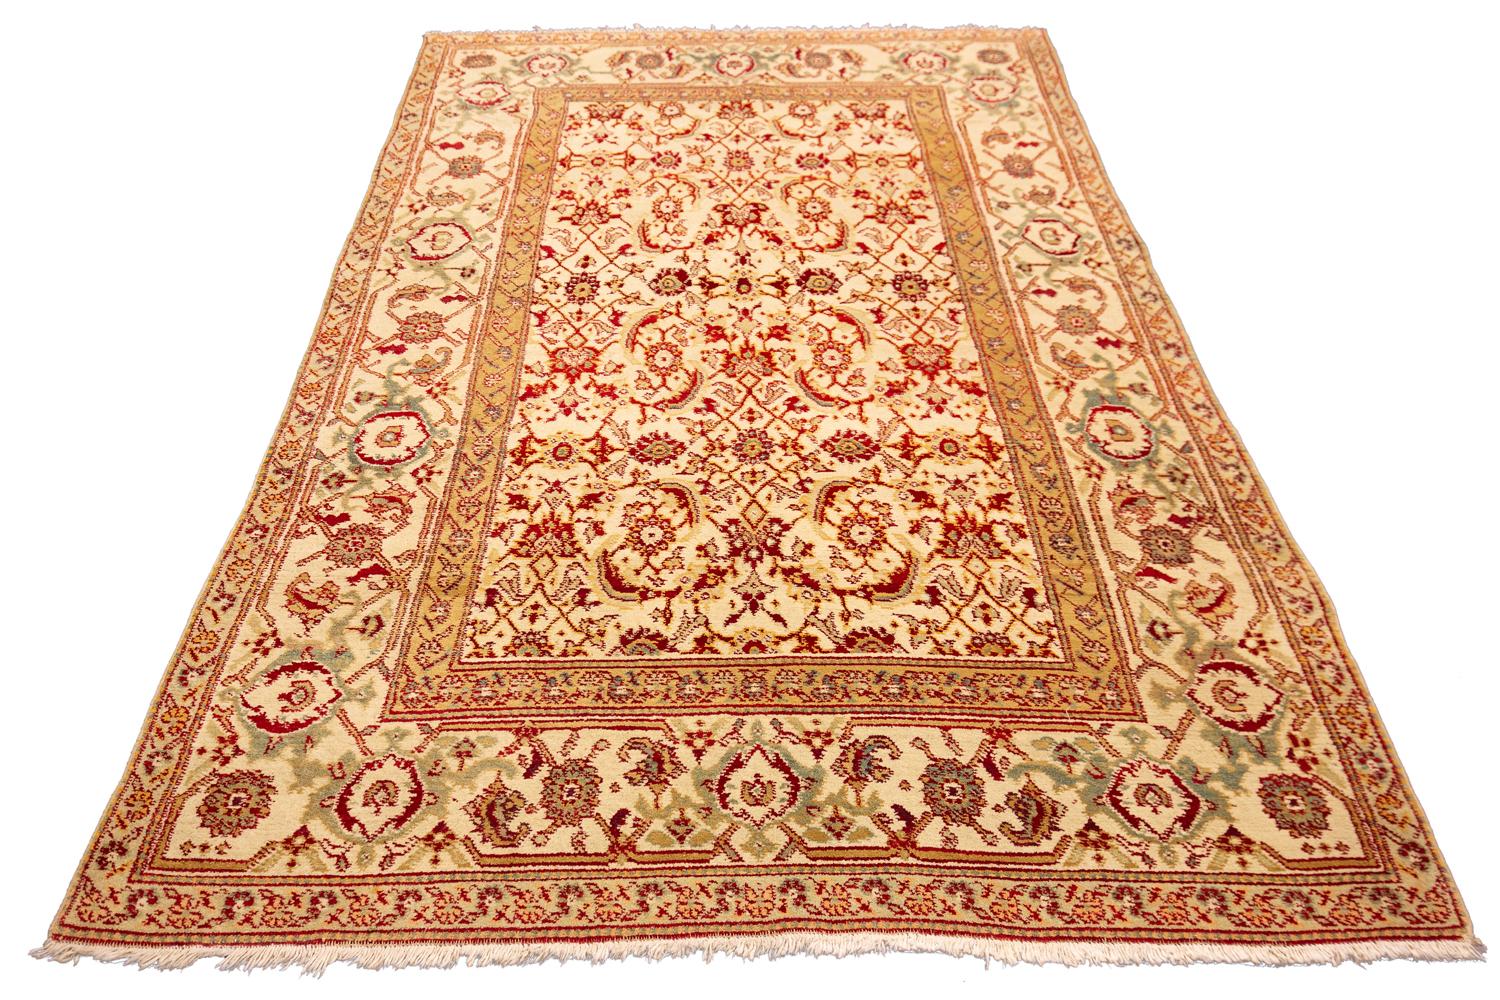 This Indian Agra Antique rug Beige Field Floral All-over is a beautiful and detailed piece that would be perfect for any home. The all over field with stylized motif design is extremely detailed, and the wool pile with cotton warp and weft makes it